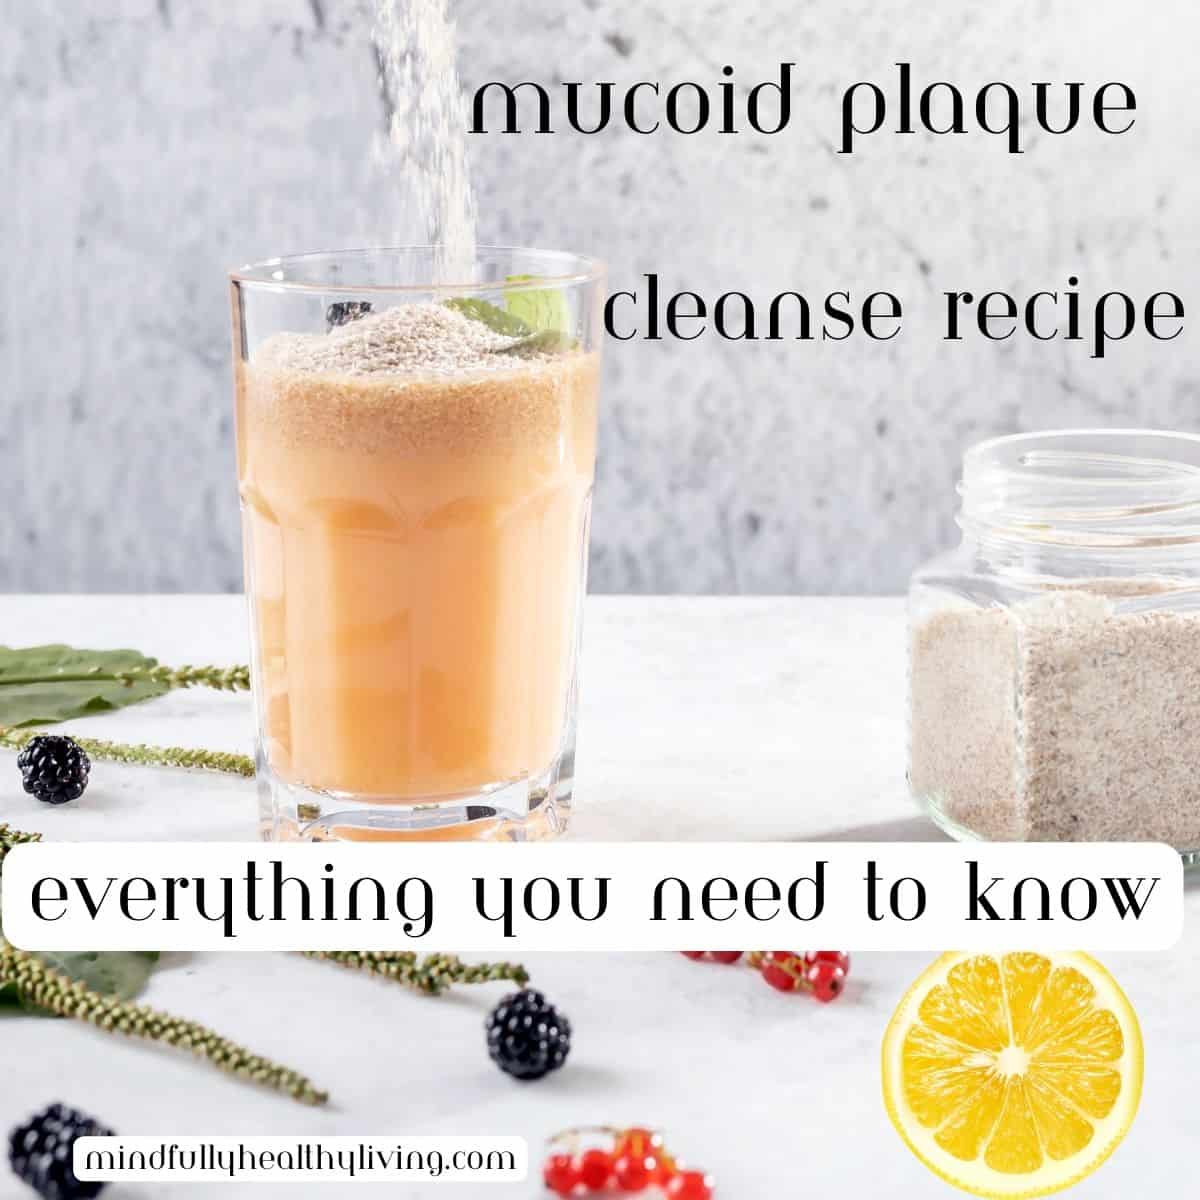 A decorative photo of a clear glass with bentonite clay, lemon juice, and psyllium husk mixed with water surrounded by berries and sitting next to a jar of psyllium husk powder and a cut lemon. On top of the photo is a text overlay saying mucoid plaque cleanse recipe everything you need to know mindfullyhealthyliving.com